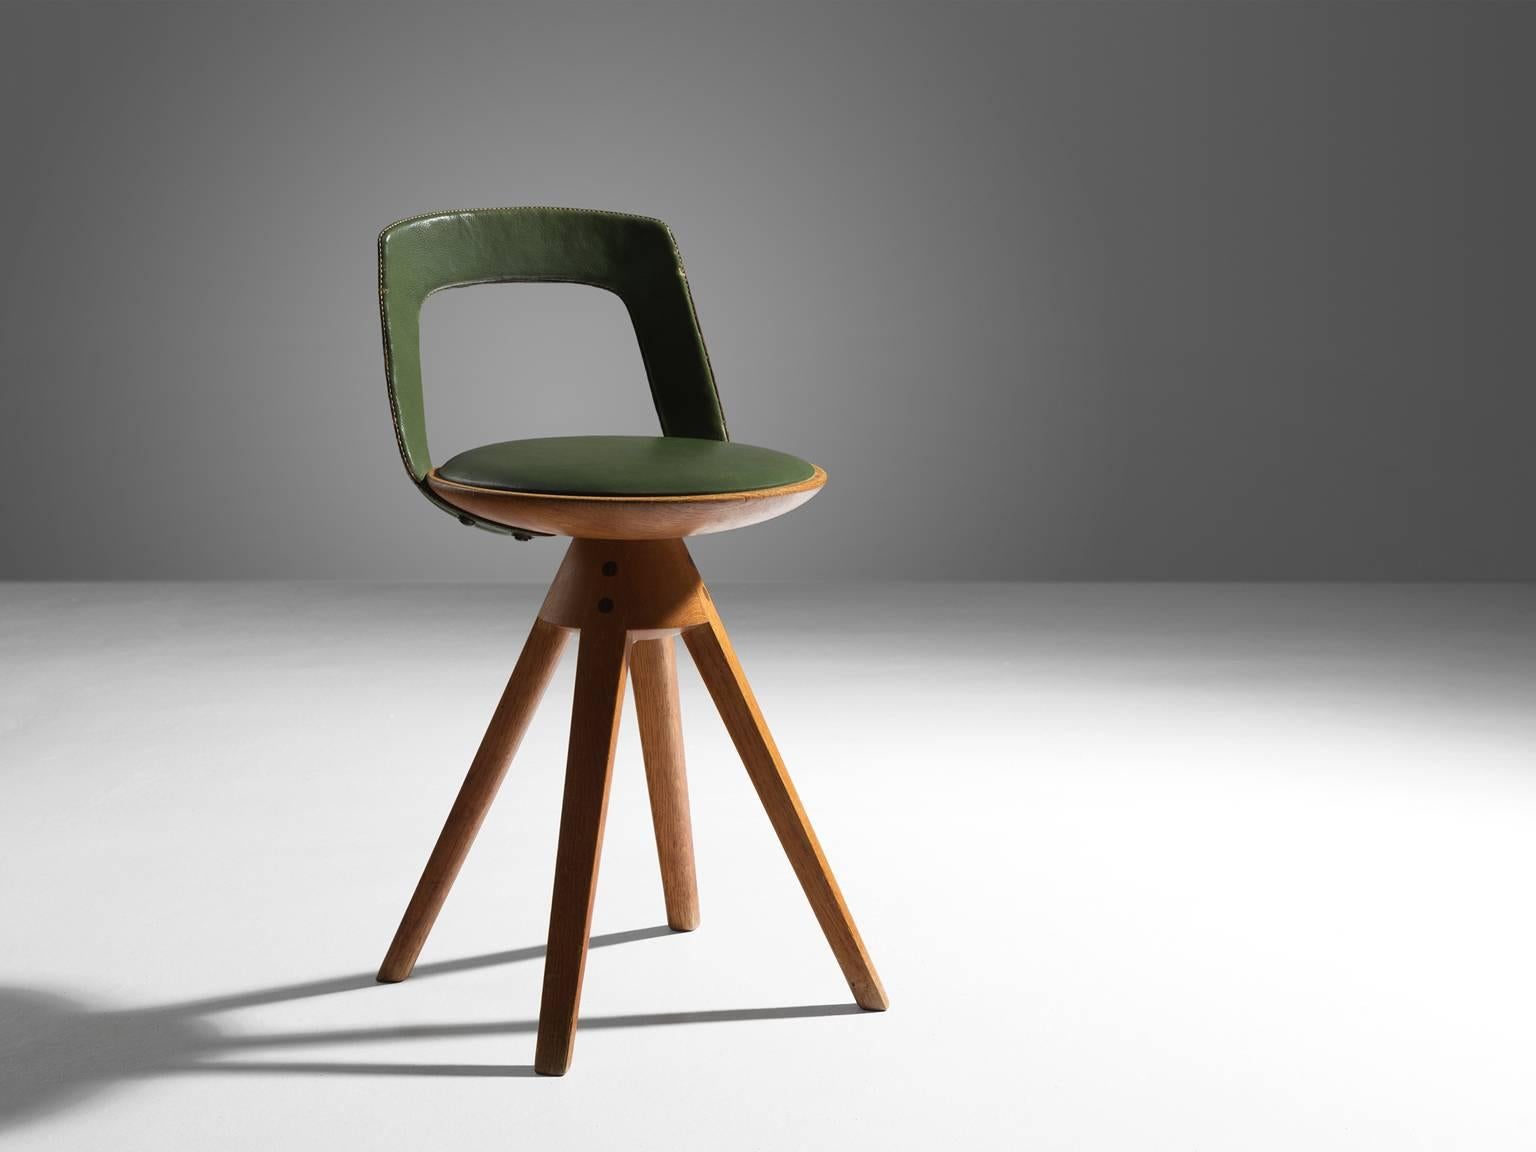 Swivel stool, in oak and leather, by Edvard & Tove Kindt-Larsen for Thorald Madsens Snedkeri, Denmark, 1957. 

Delicate swivel stool with backrest in green leather and oak, produced by Thorald Madsens Snedkeri and designed by Edvard & Tove